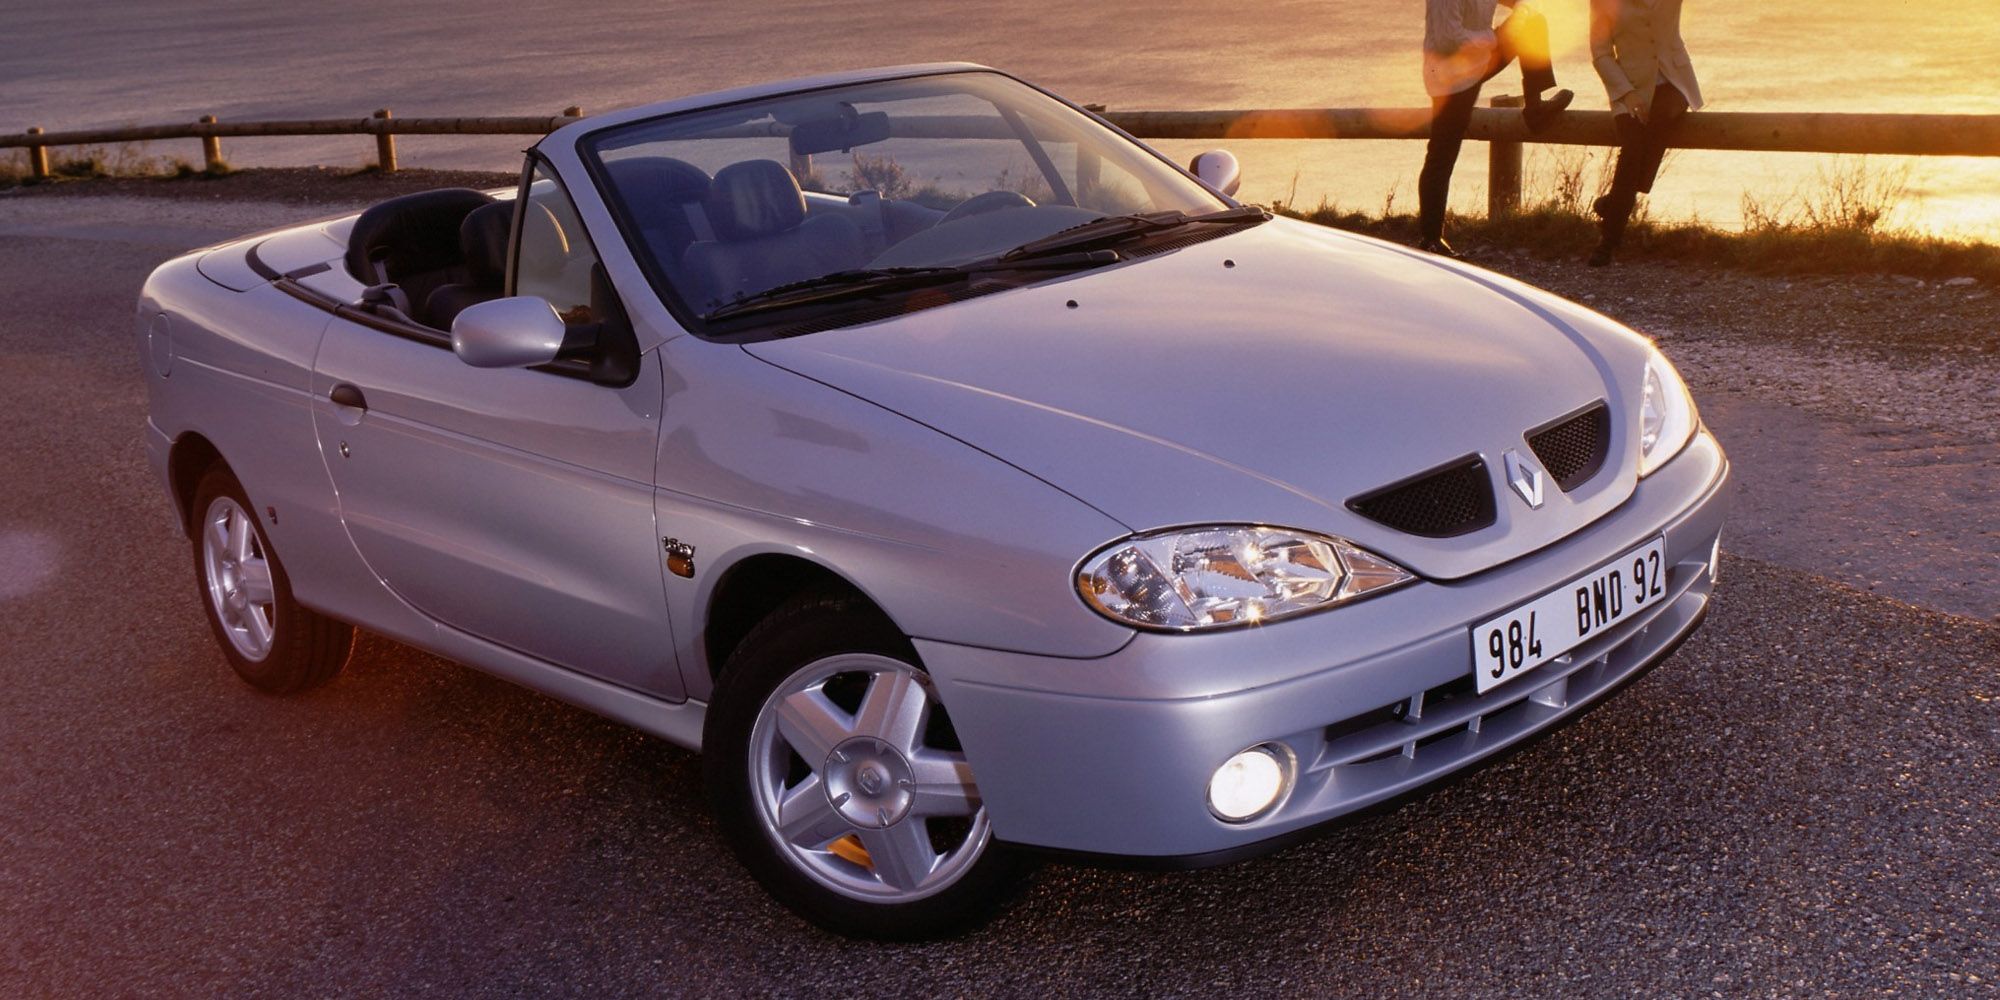 The first generation Renault Megane Convertible in silver